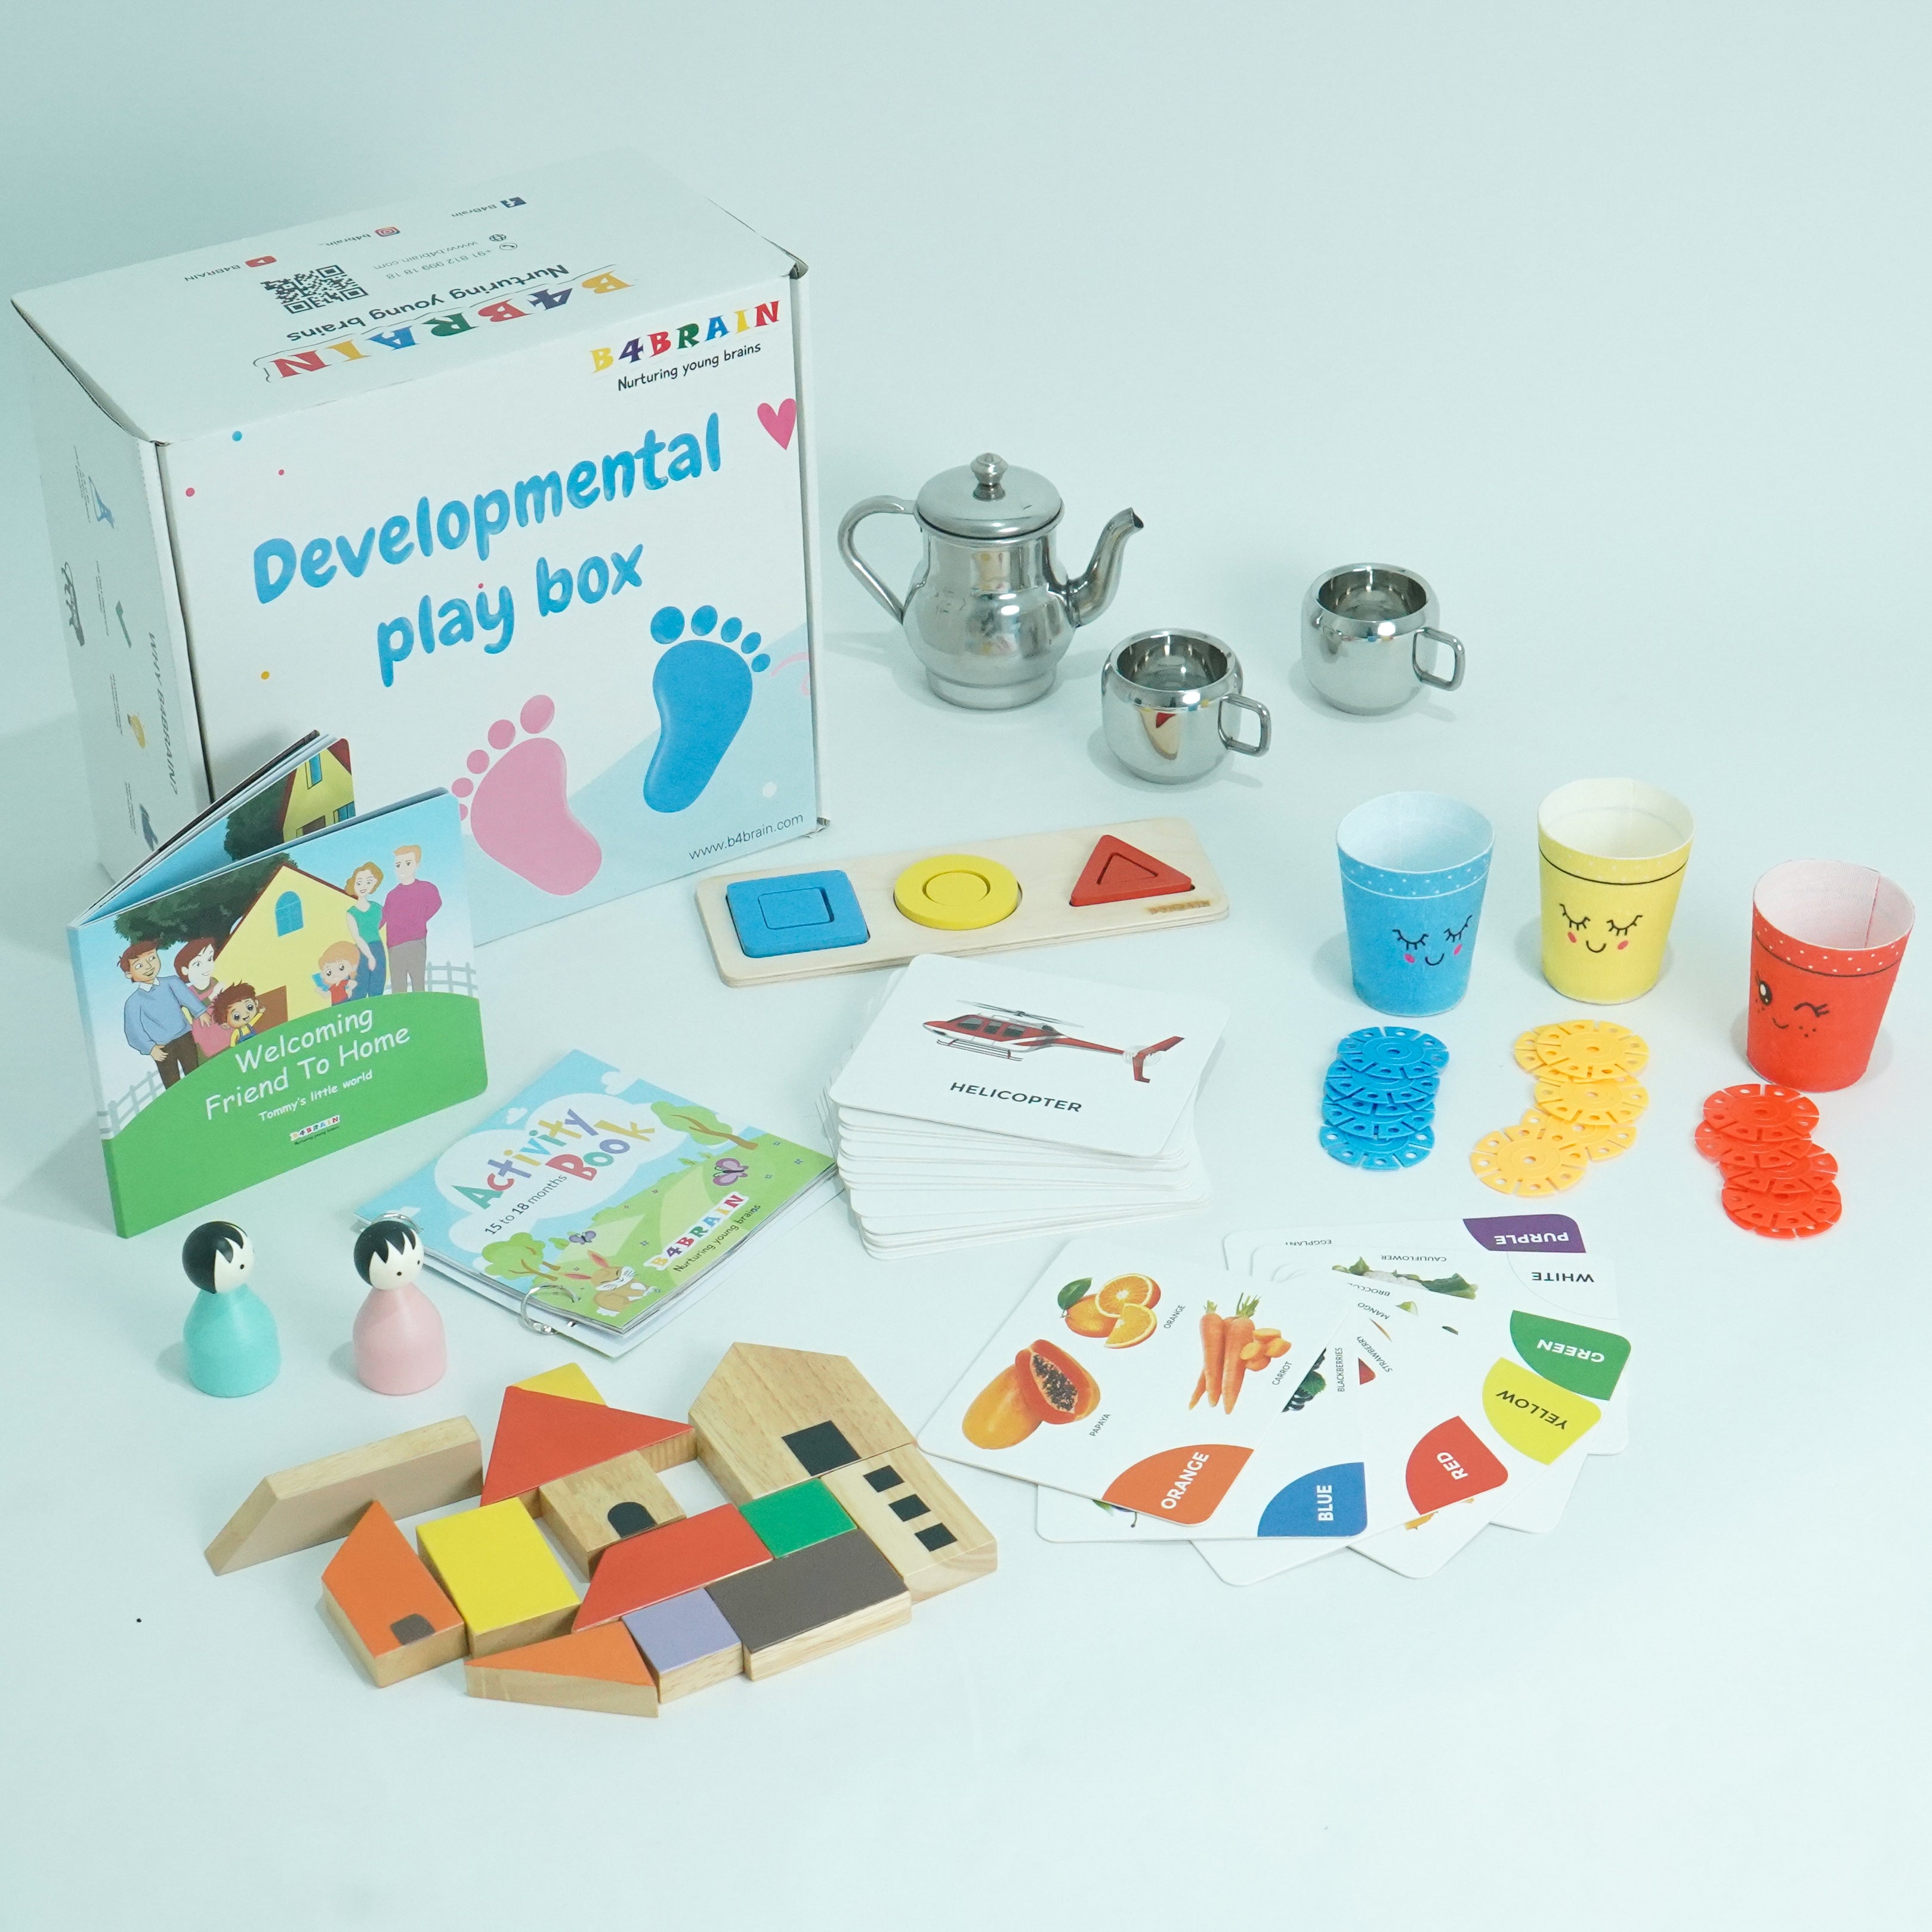 Complete Playbox(18-21 months)